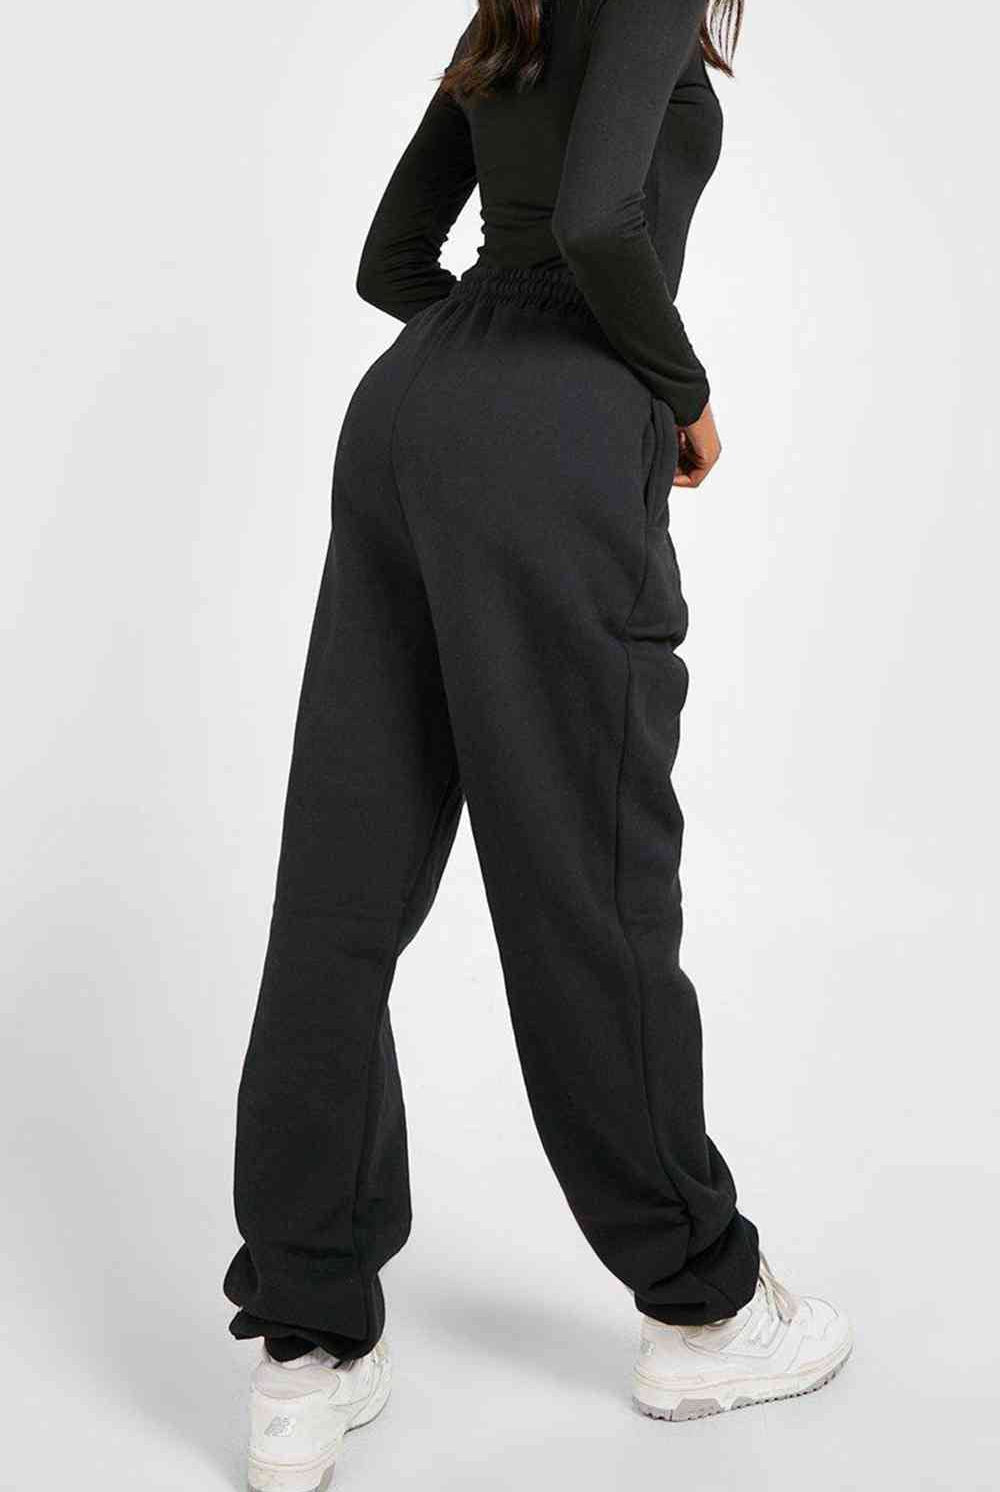 Simply Love Full Size Lunar Phase Graphic Sweatpants - GemThreads Boutique